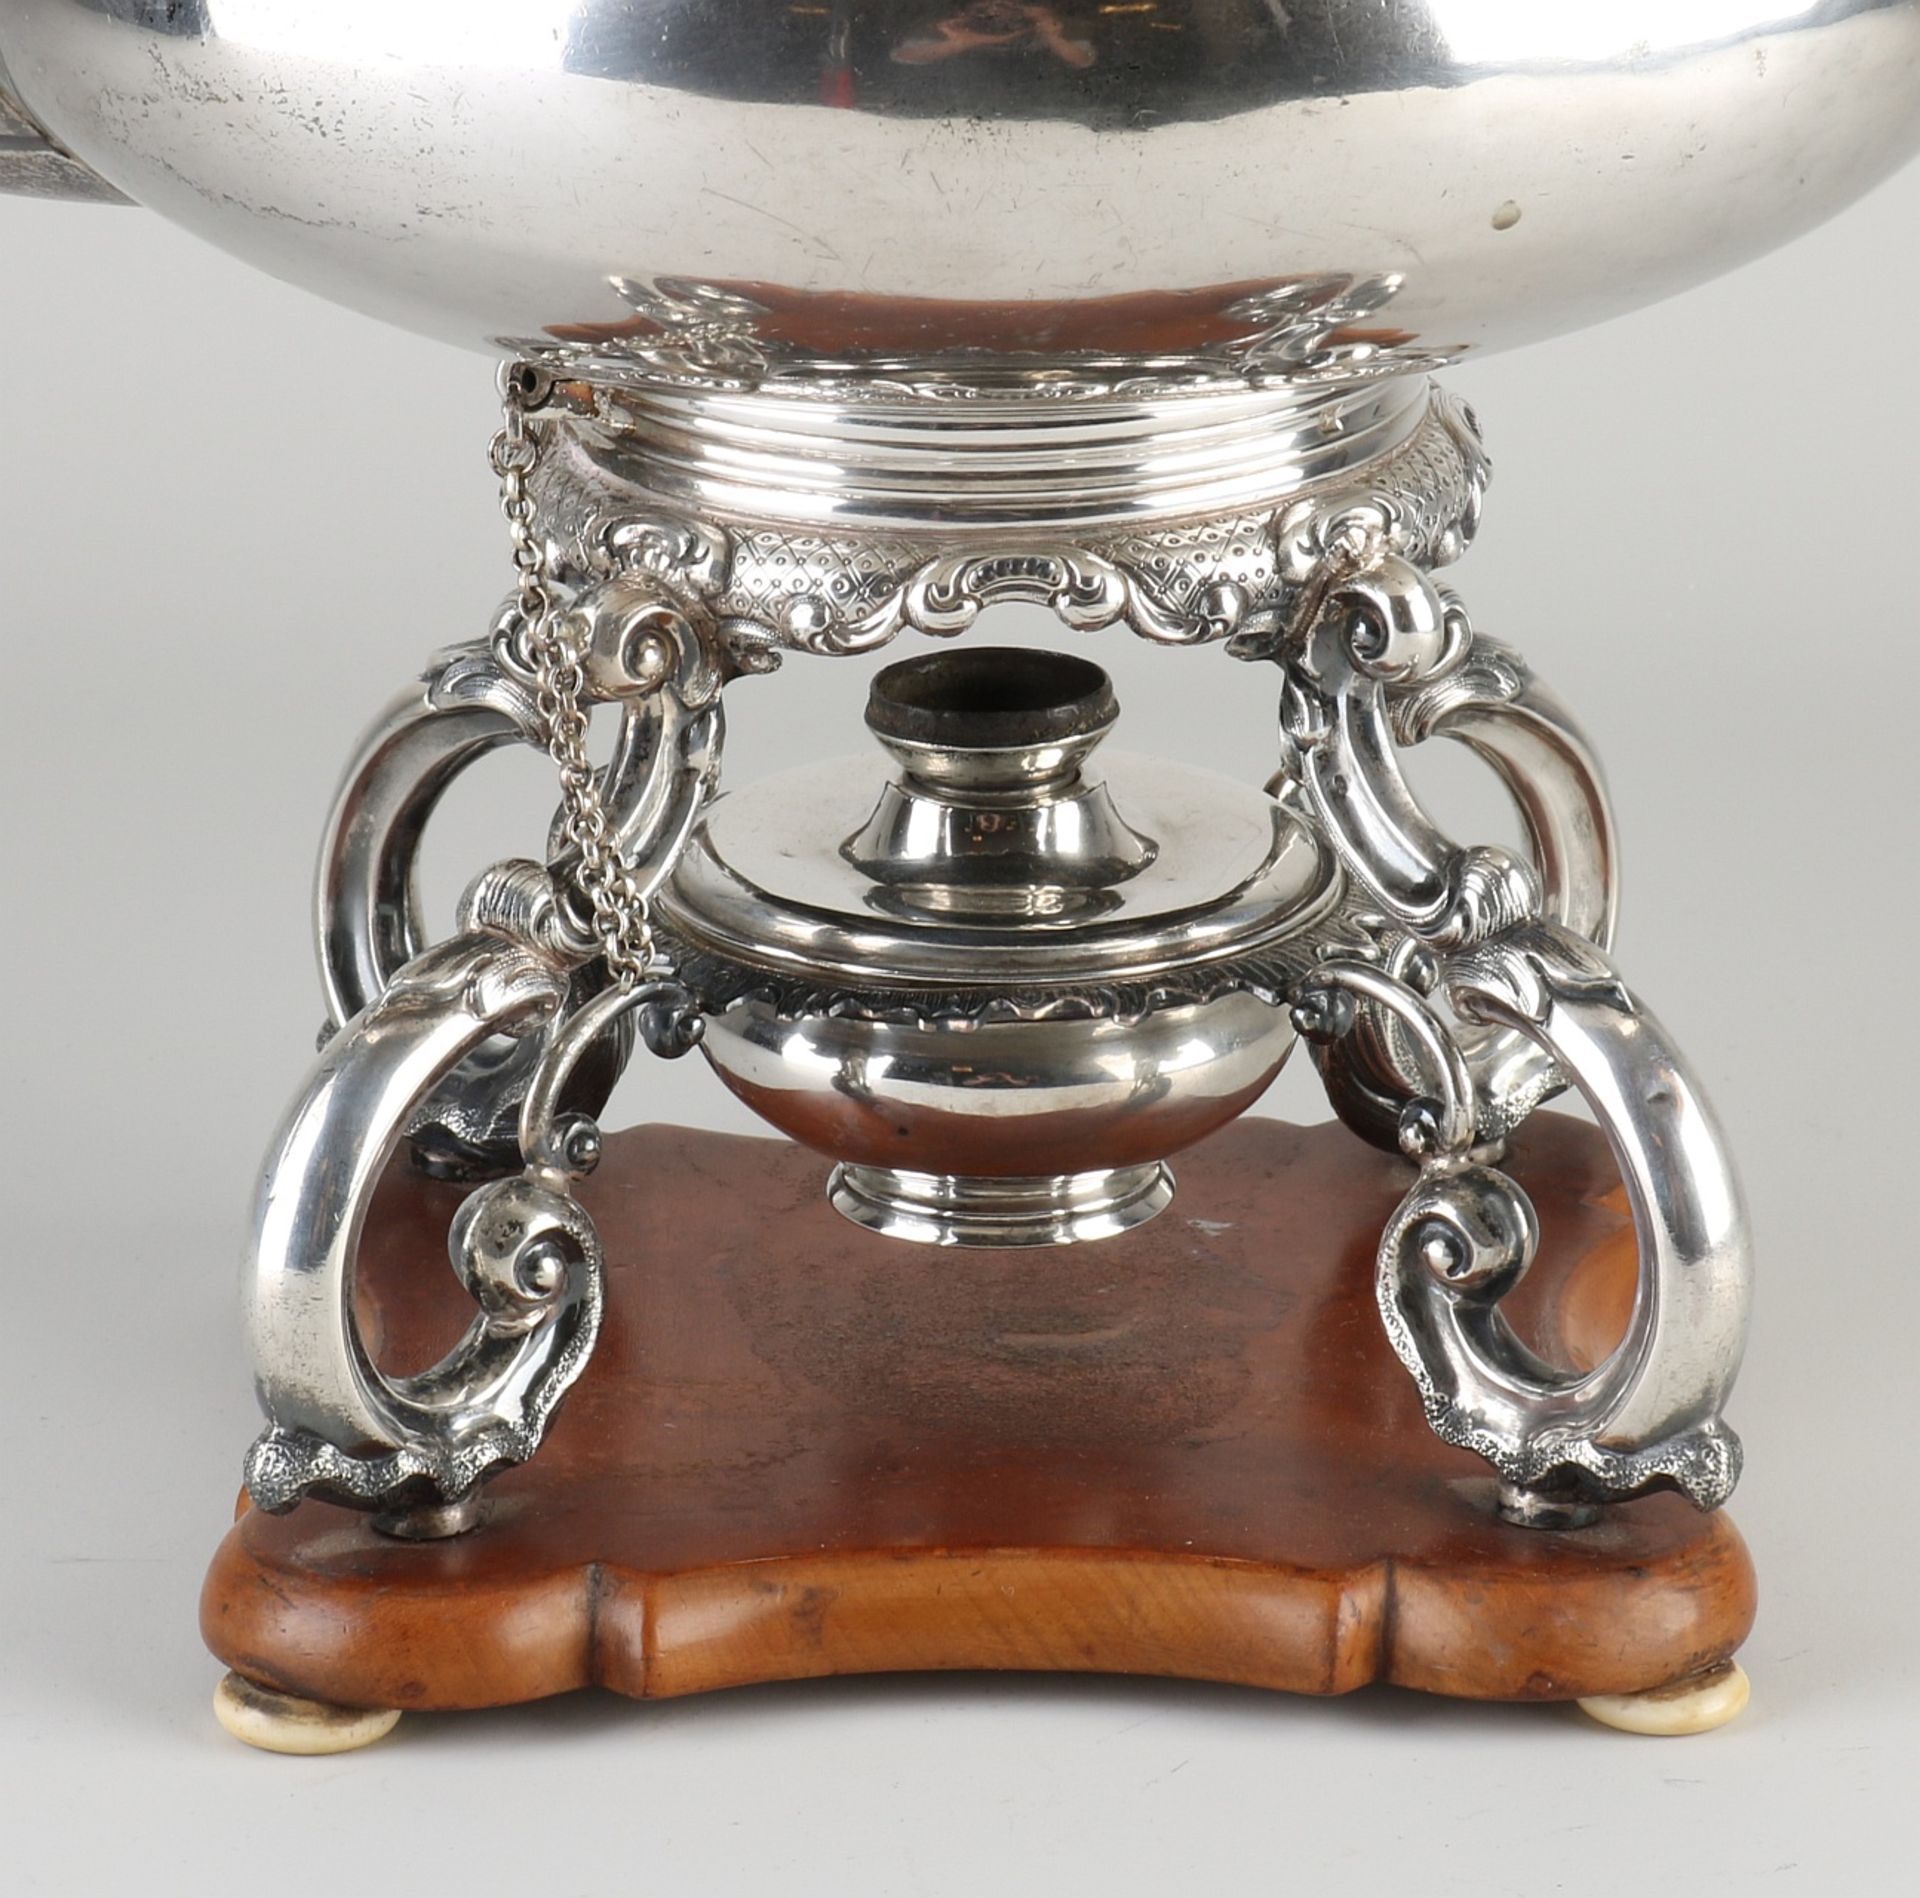 Antique silver teapot - Image 2 of 3